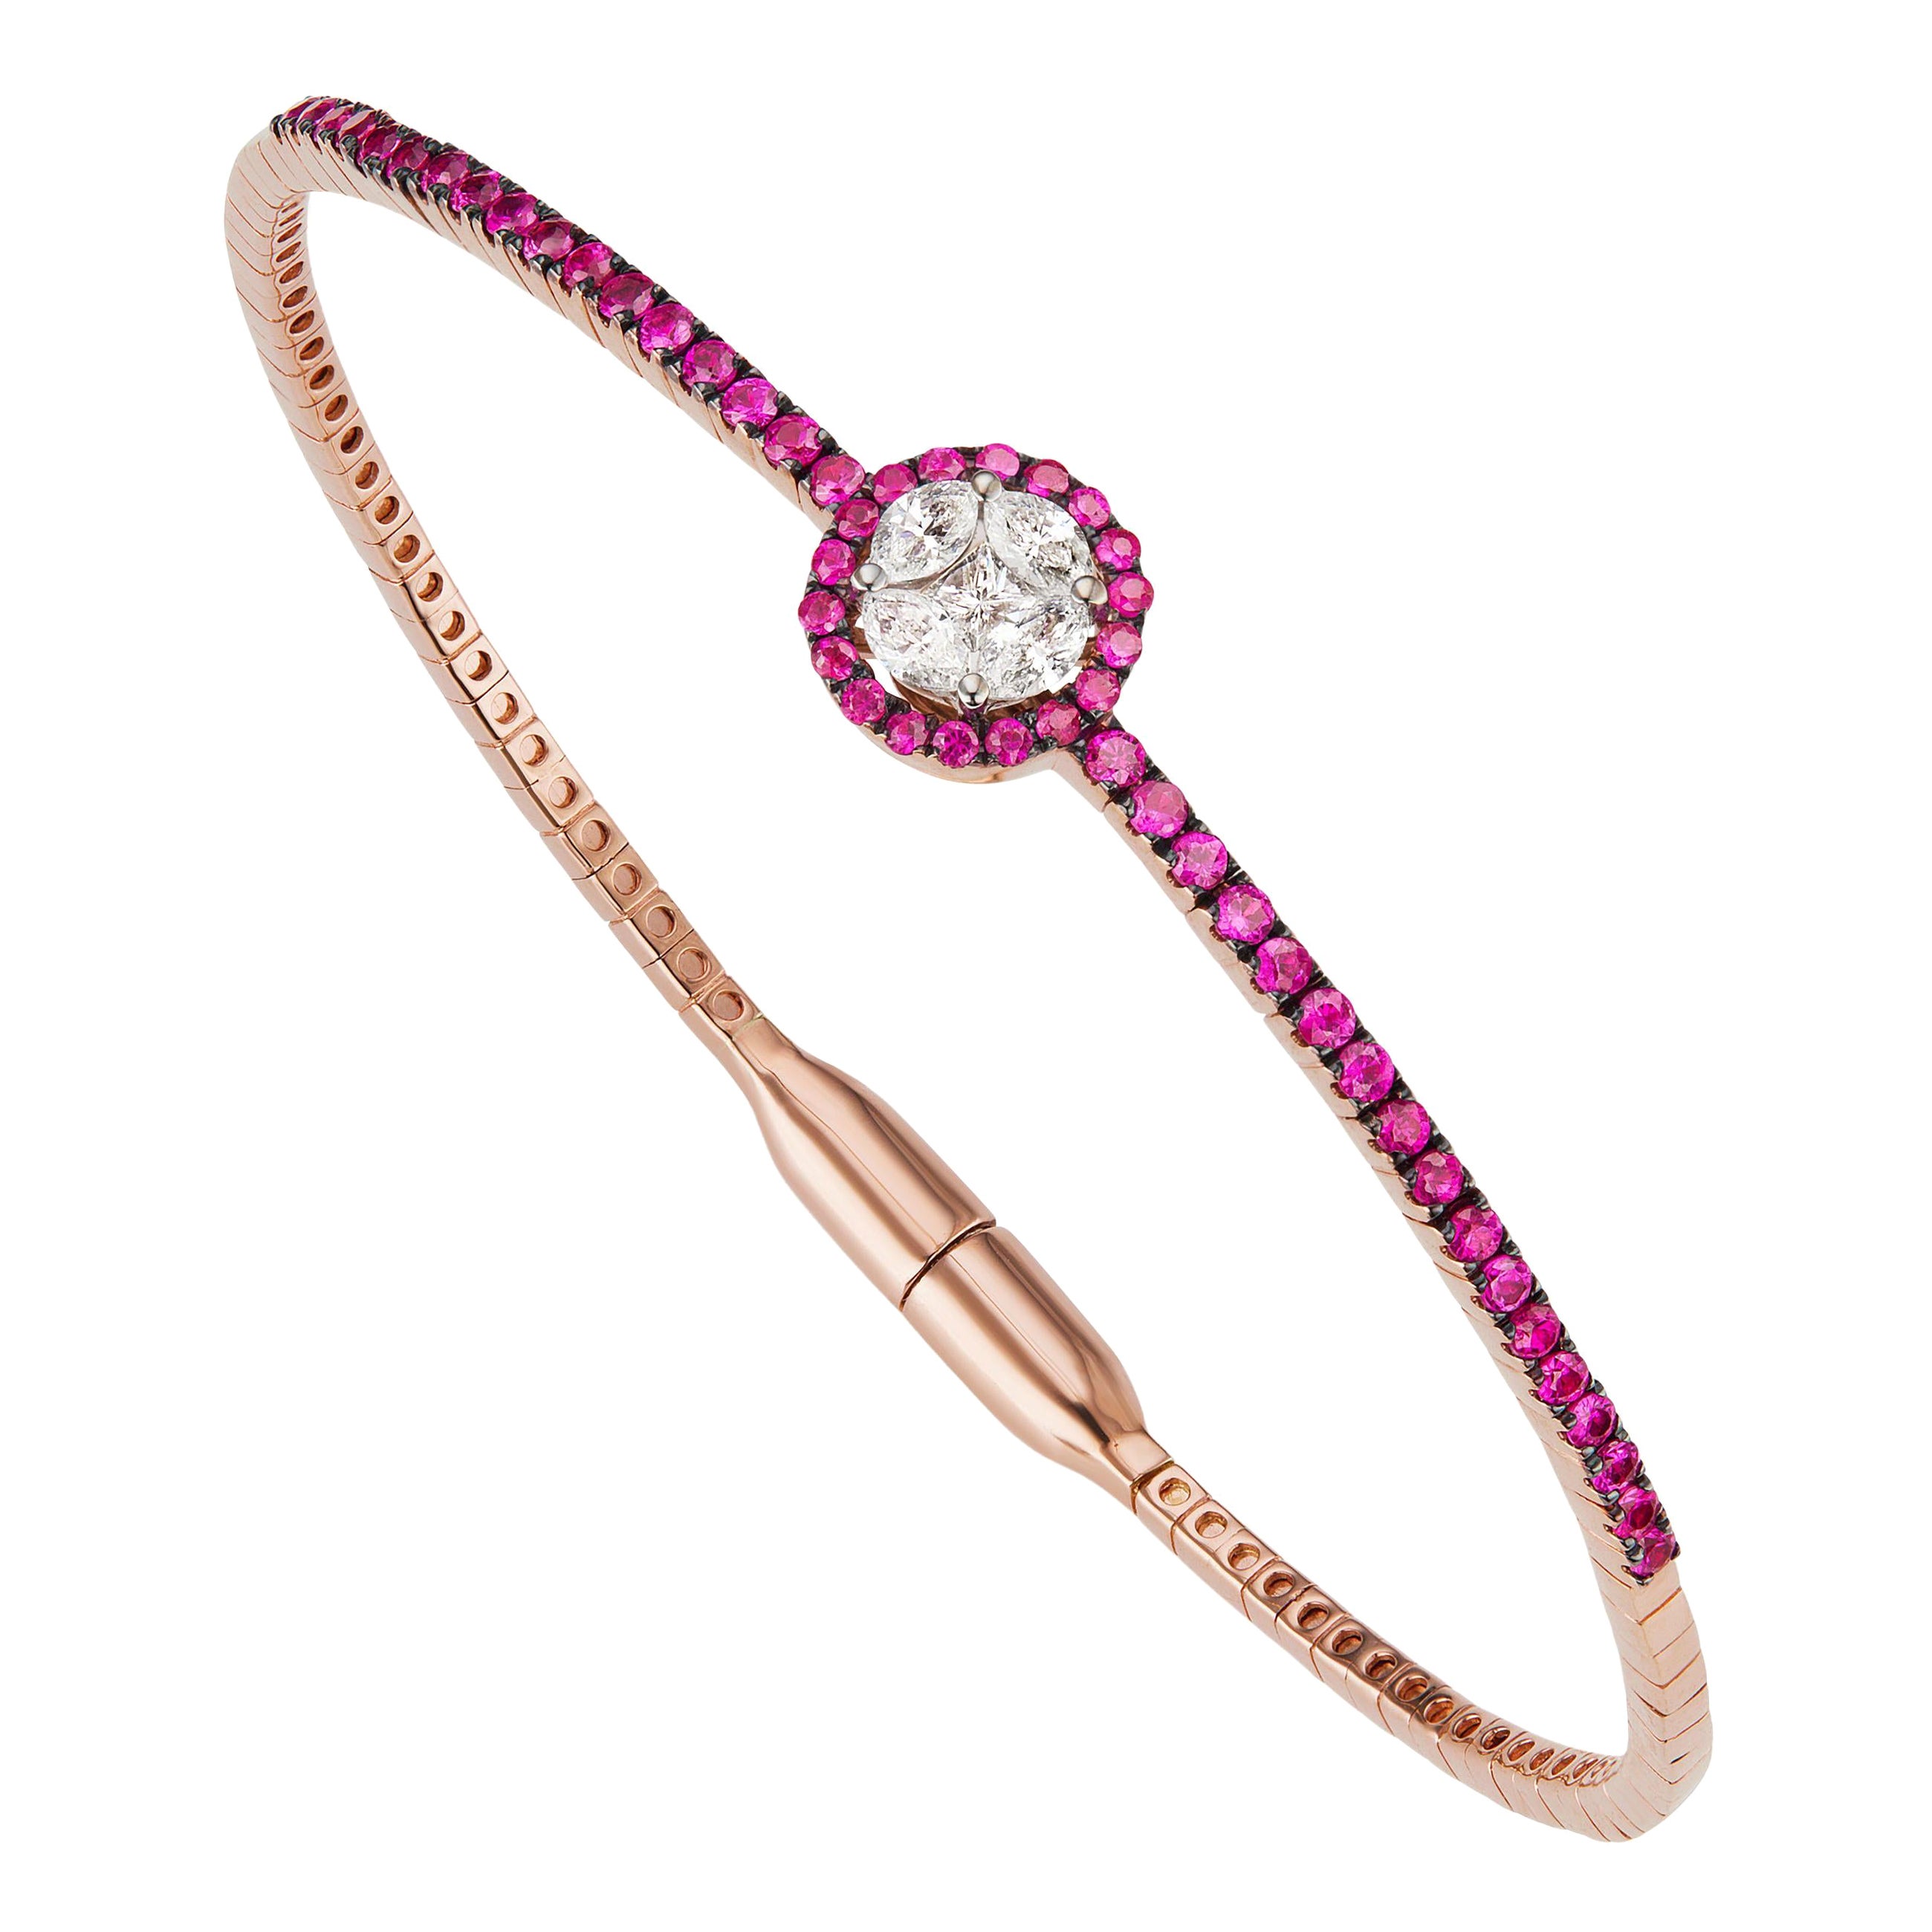 Gemistry 1.08cttw. Round Illusion Diamond and Ruby Bangle in 18k Rose Gold For Sale